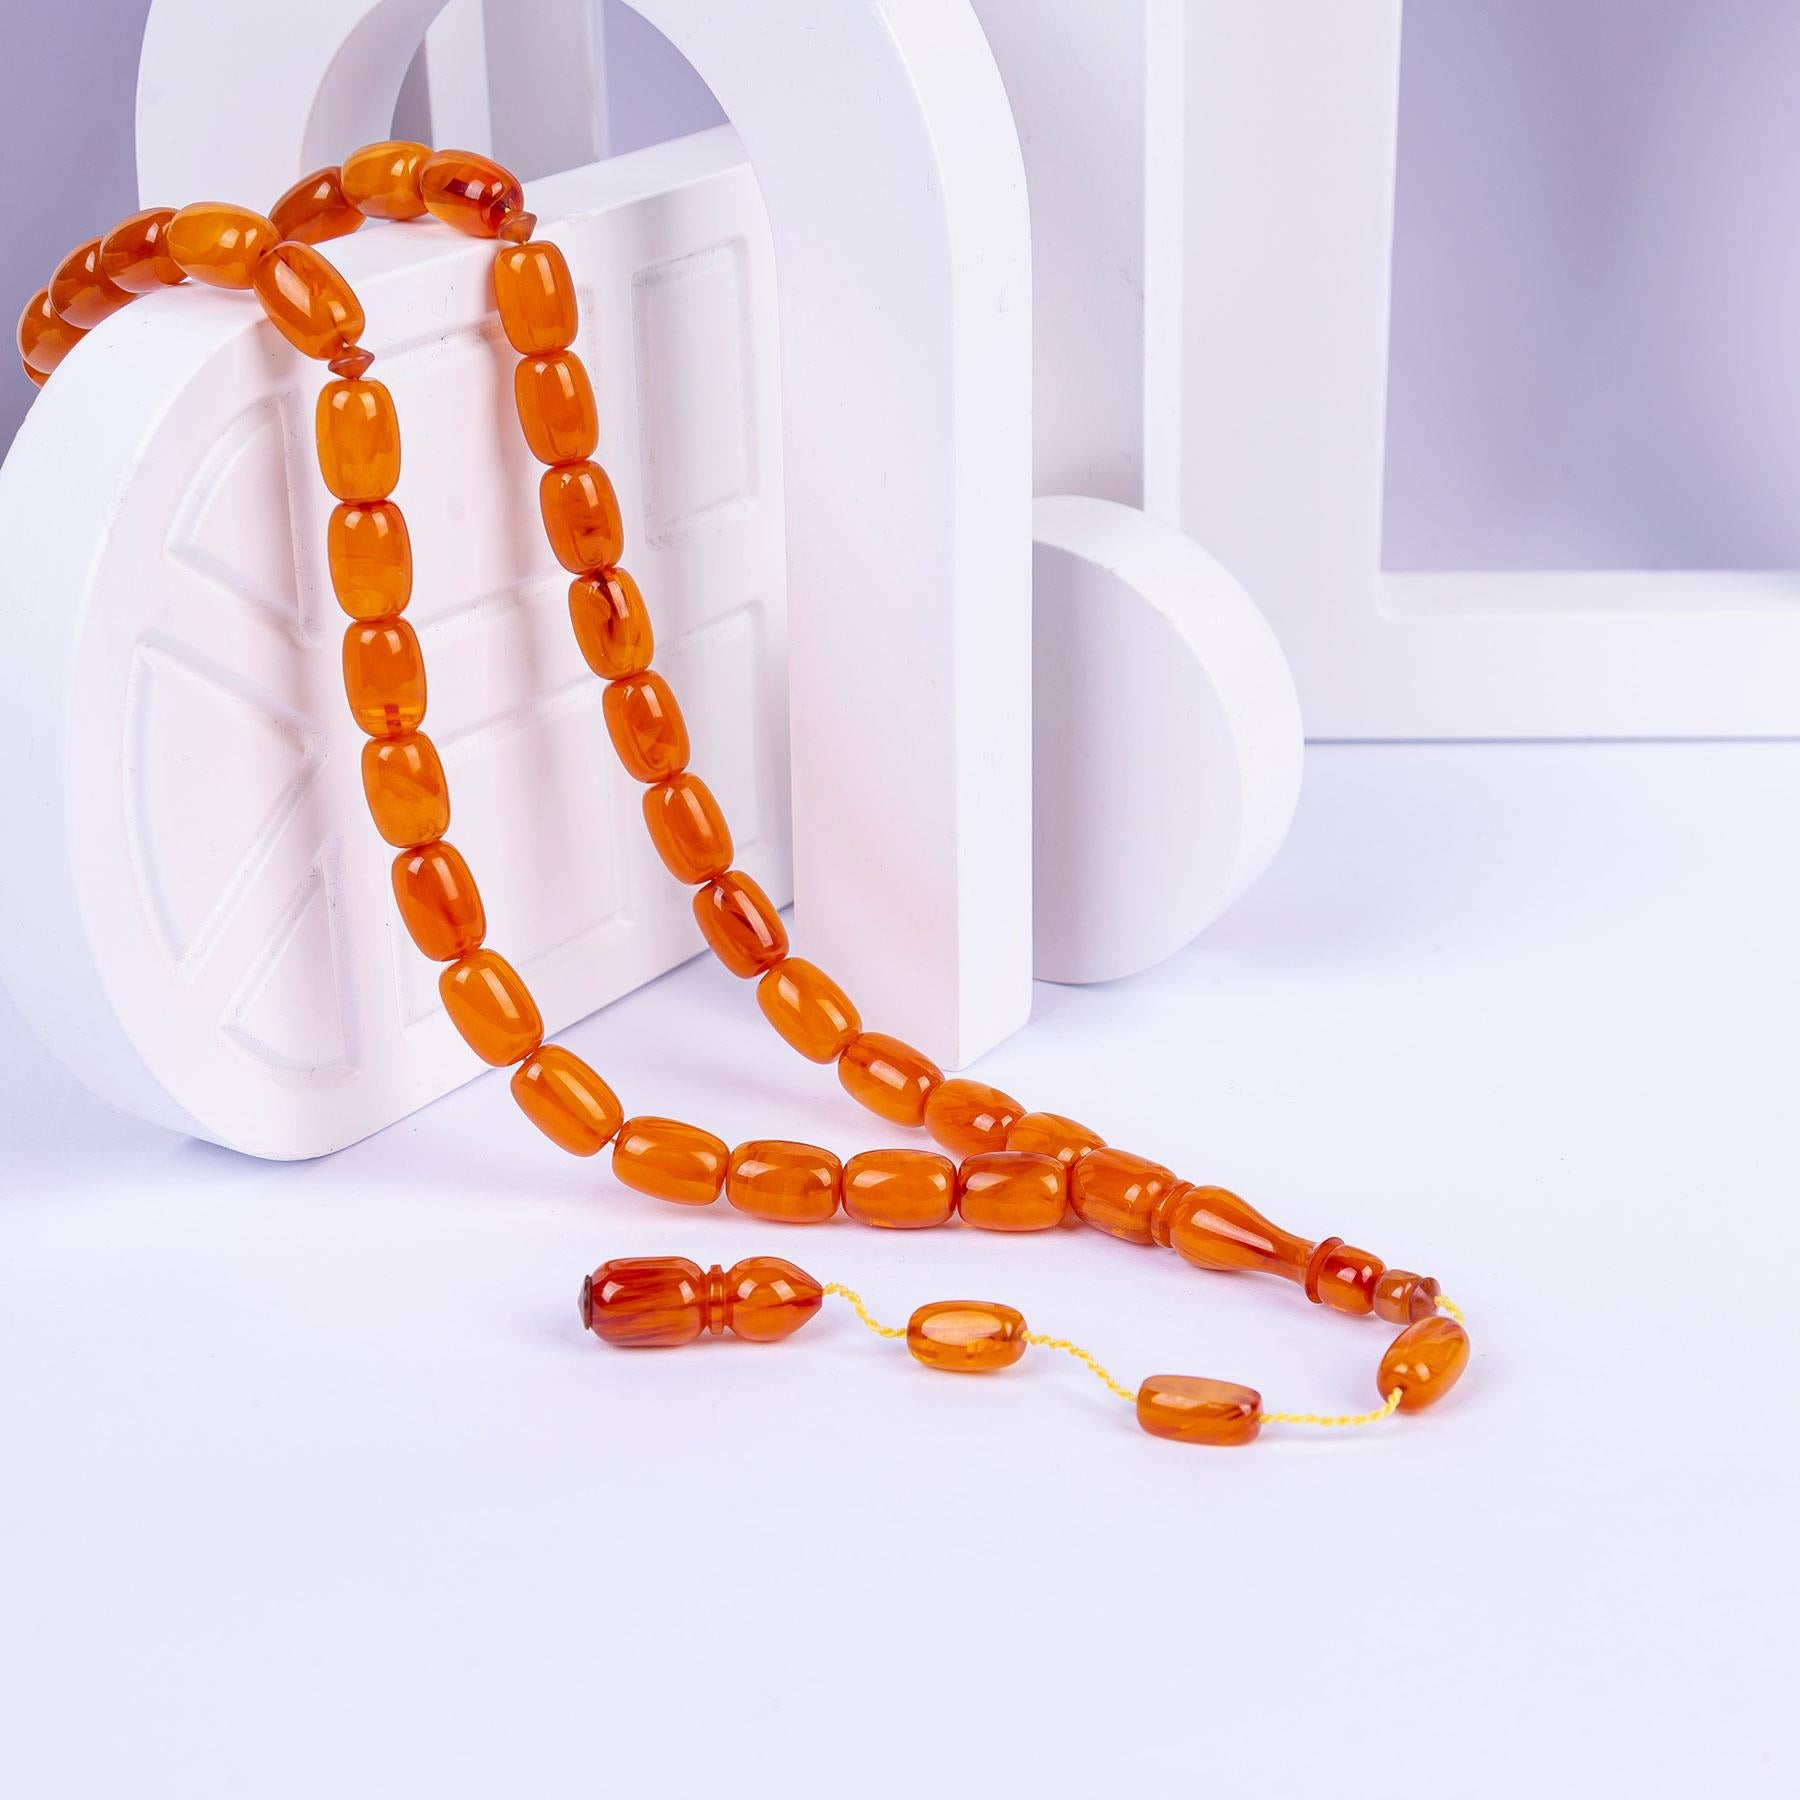 Systematic Capsule Cut and Pressed Amber Prayer Beads 1